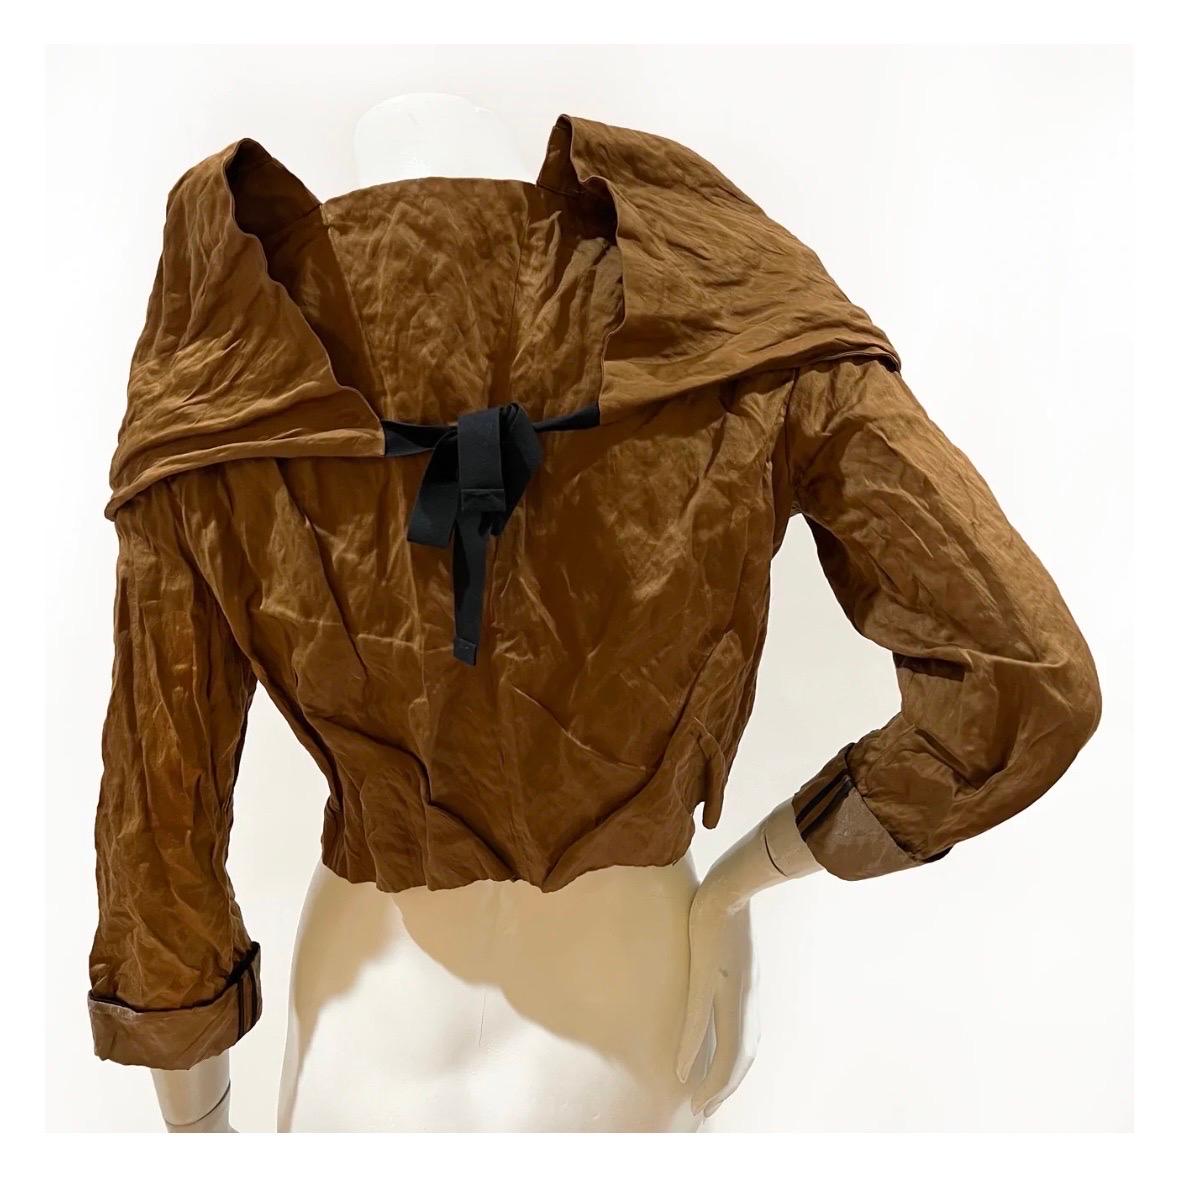 Bronze Bra & Jacket Two-Piece Set by Prada
Spring 2009 Ready-to-Wear
Made in Italy
Padded bra with elastic back and removable straps (front button closure)
Cropped jacket with front tie and multiple hook closures
Bronze crinkled cotton with black